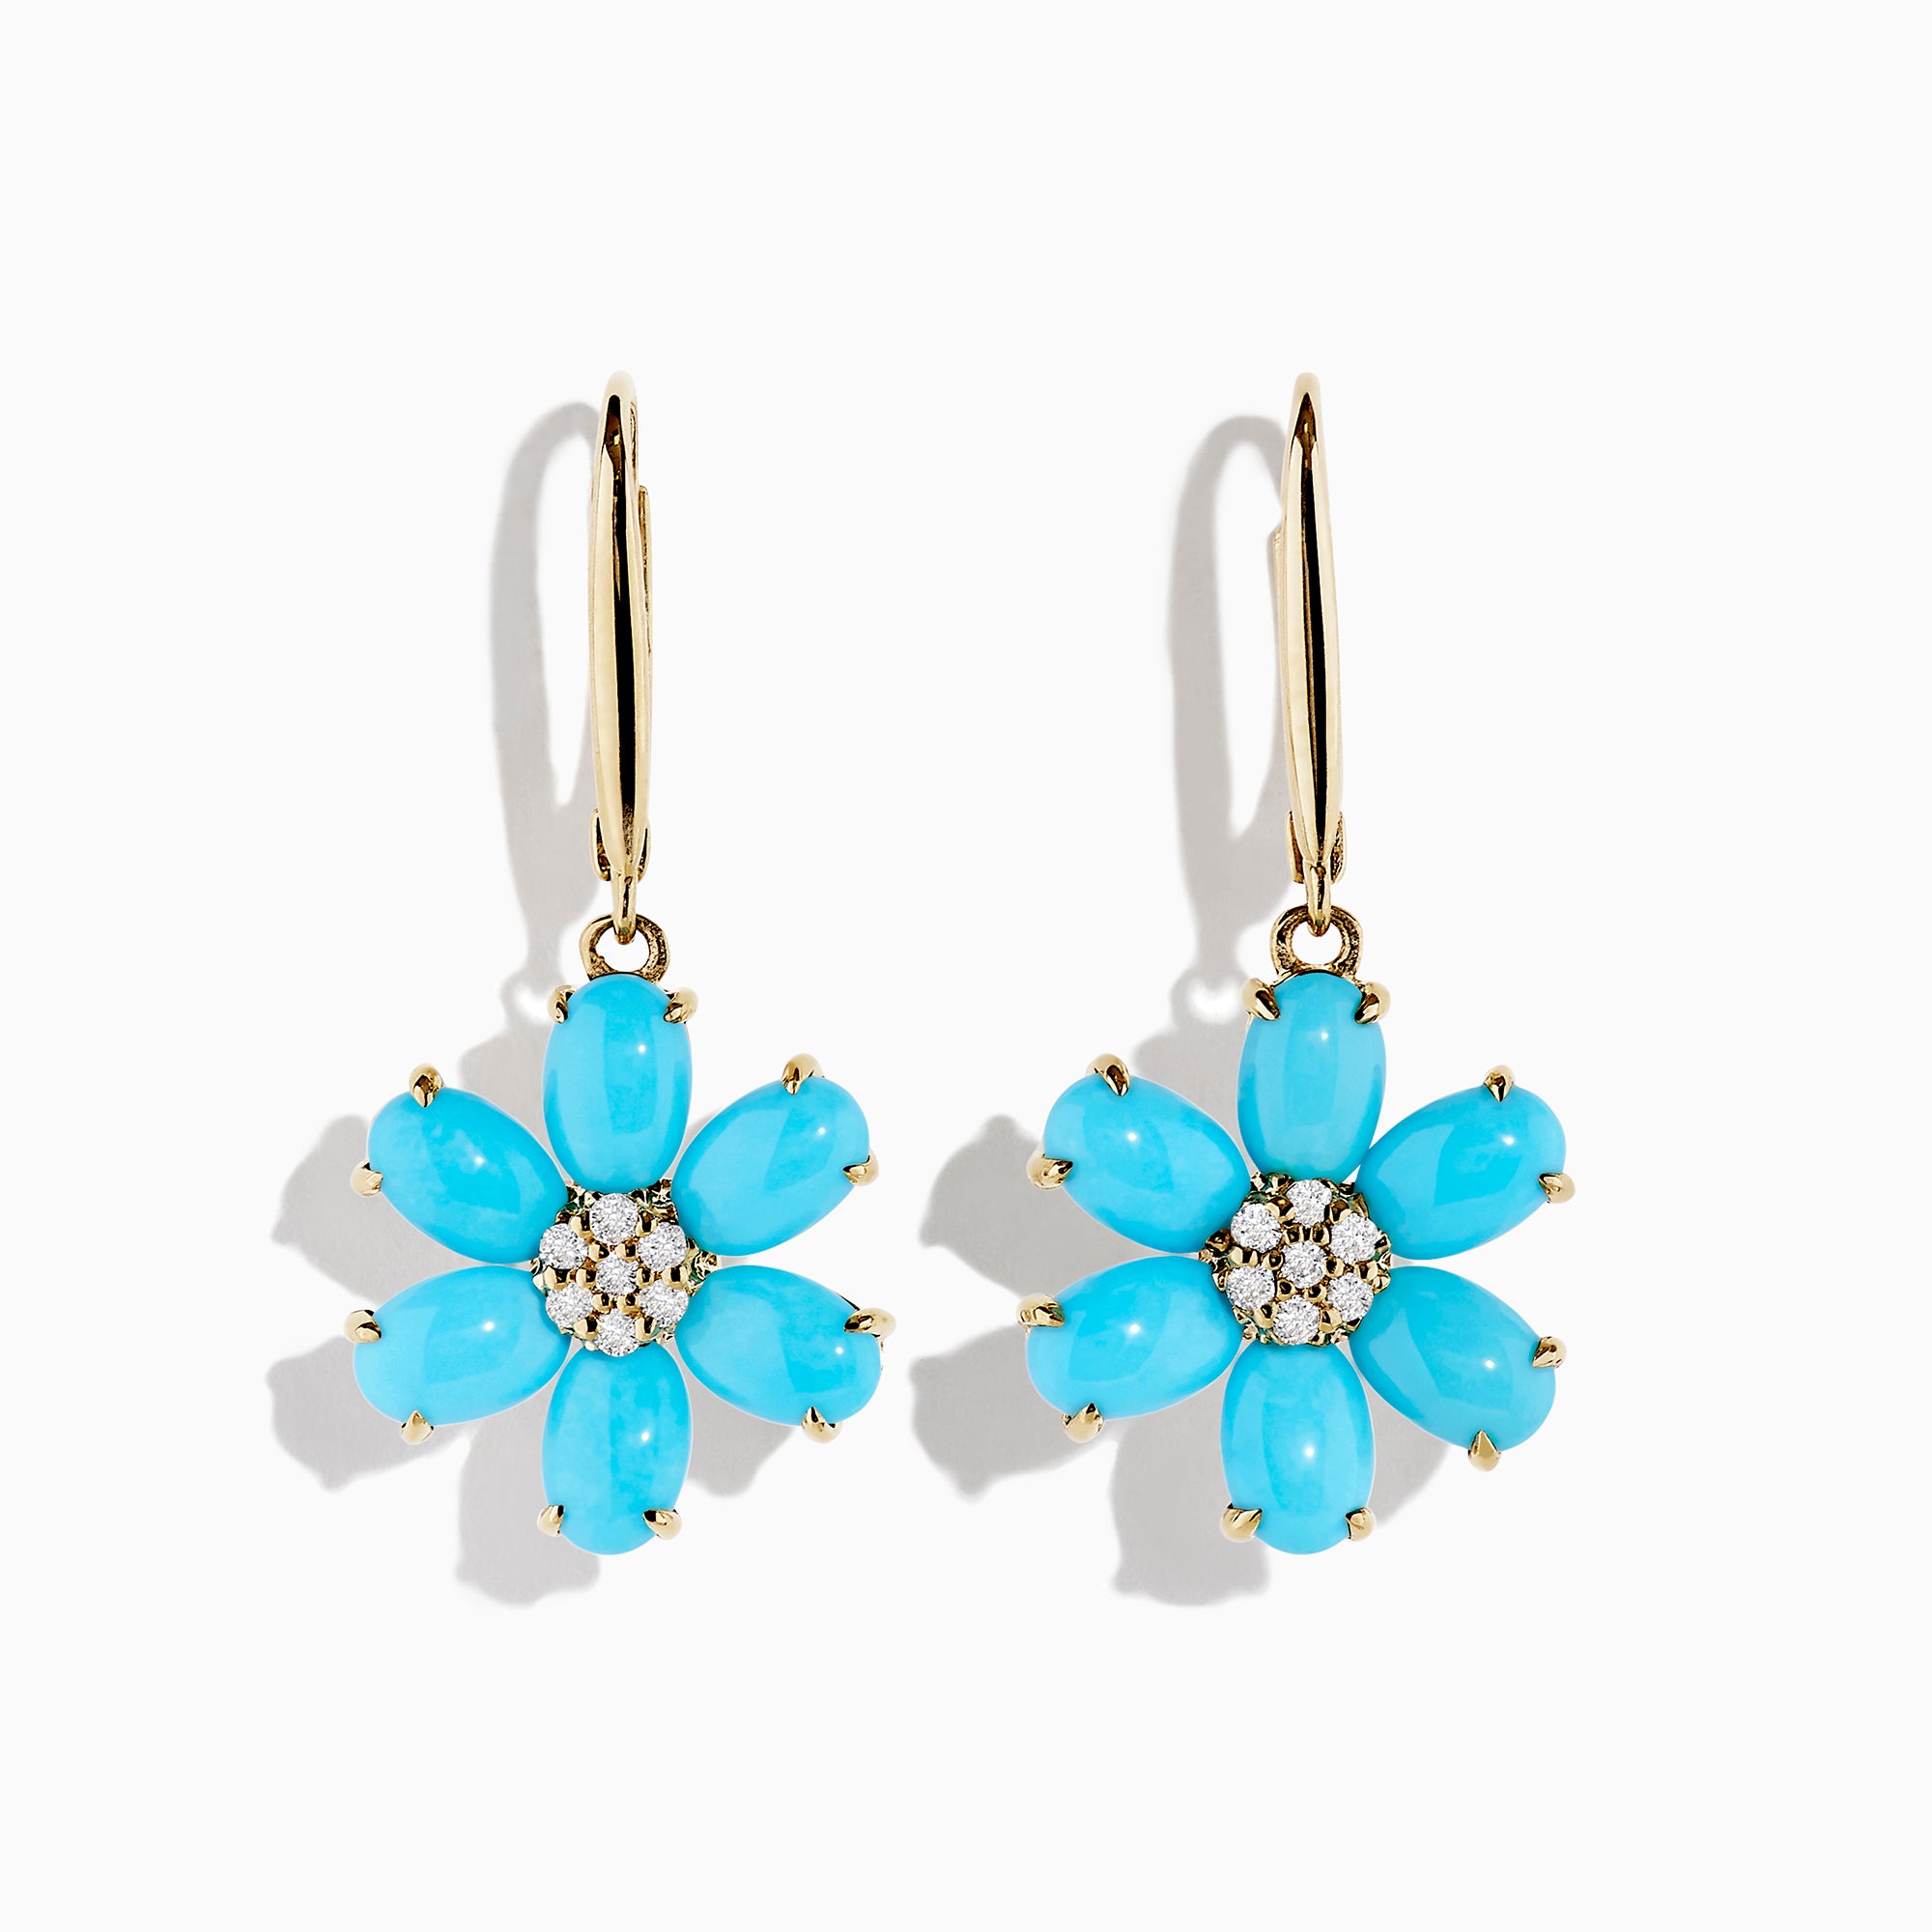 Effy 14K Yellow Gold Turquoise and Diamond Flower Earrings, 4.83 TCW